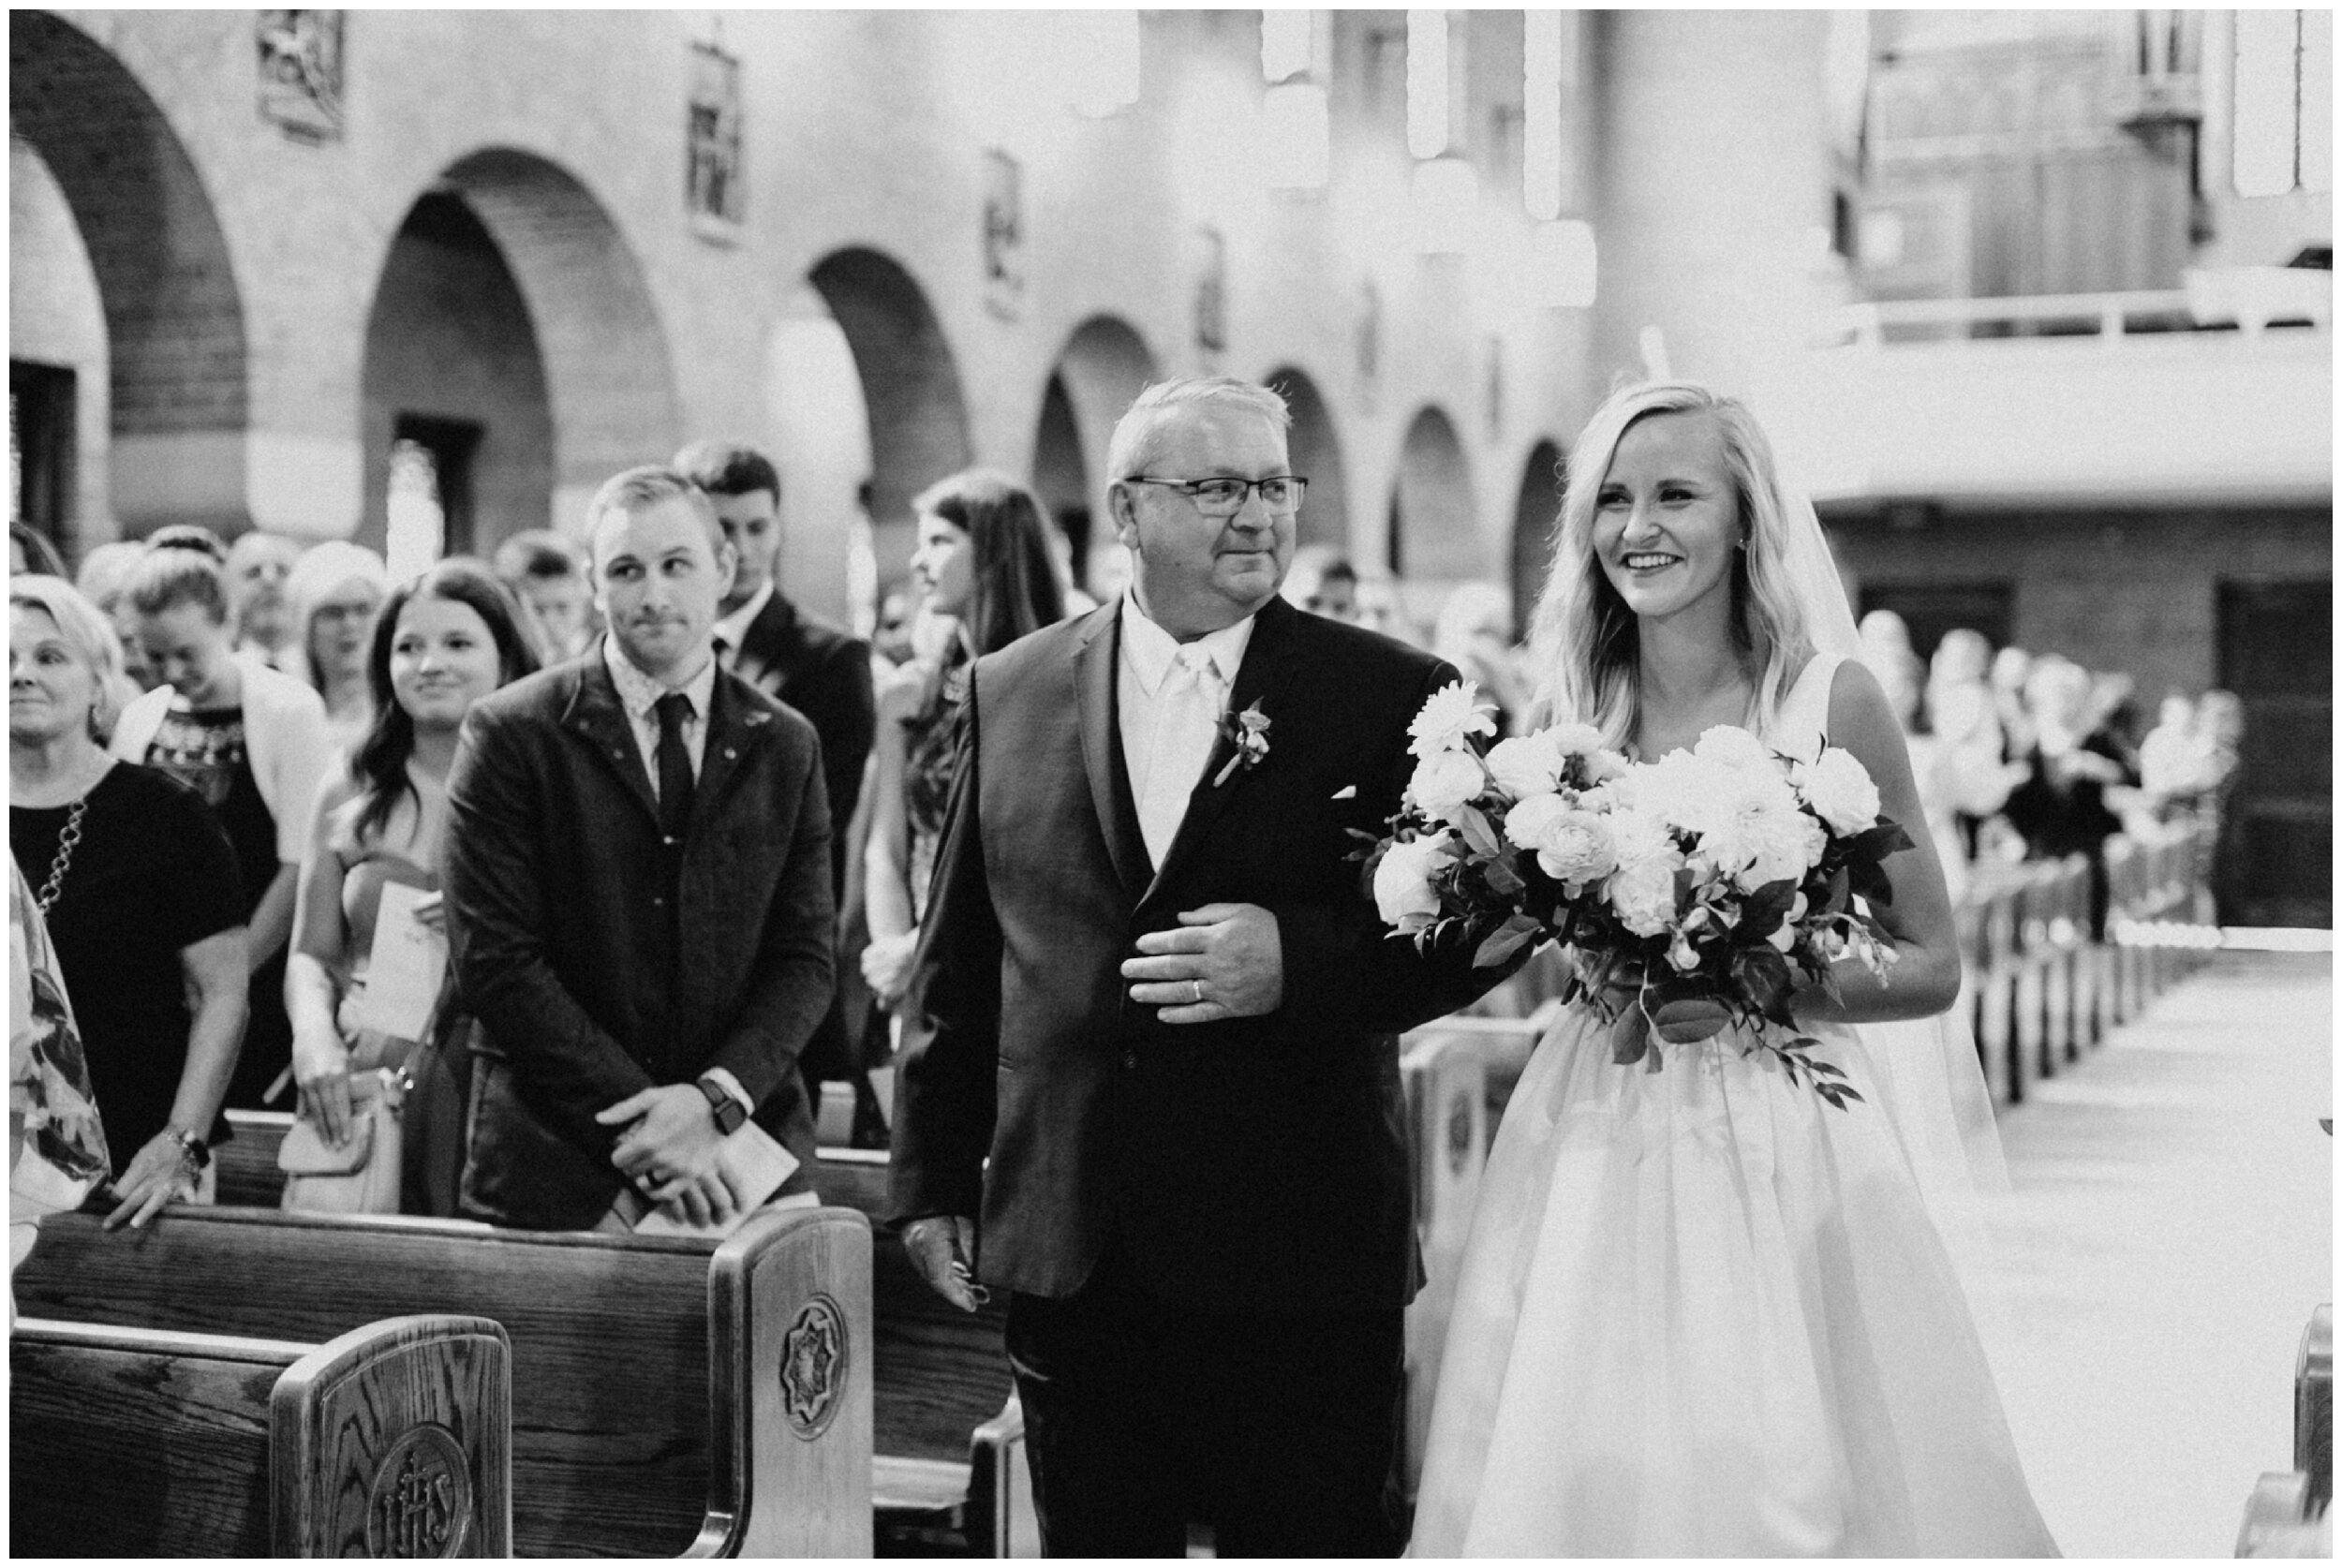 Father and bride walking down aisle during wedding ceremony in Brainerd, Minnesota